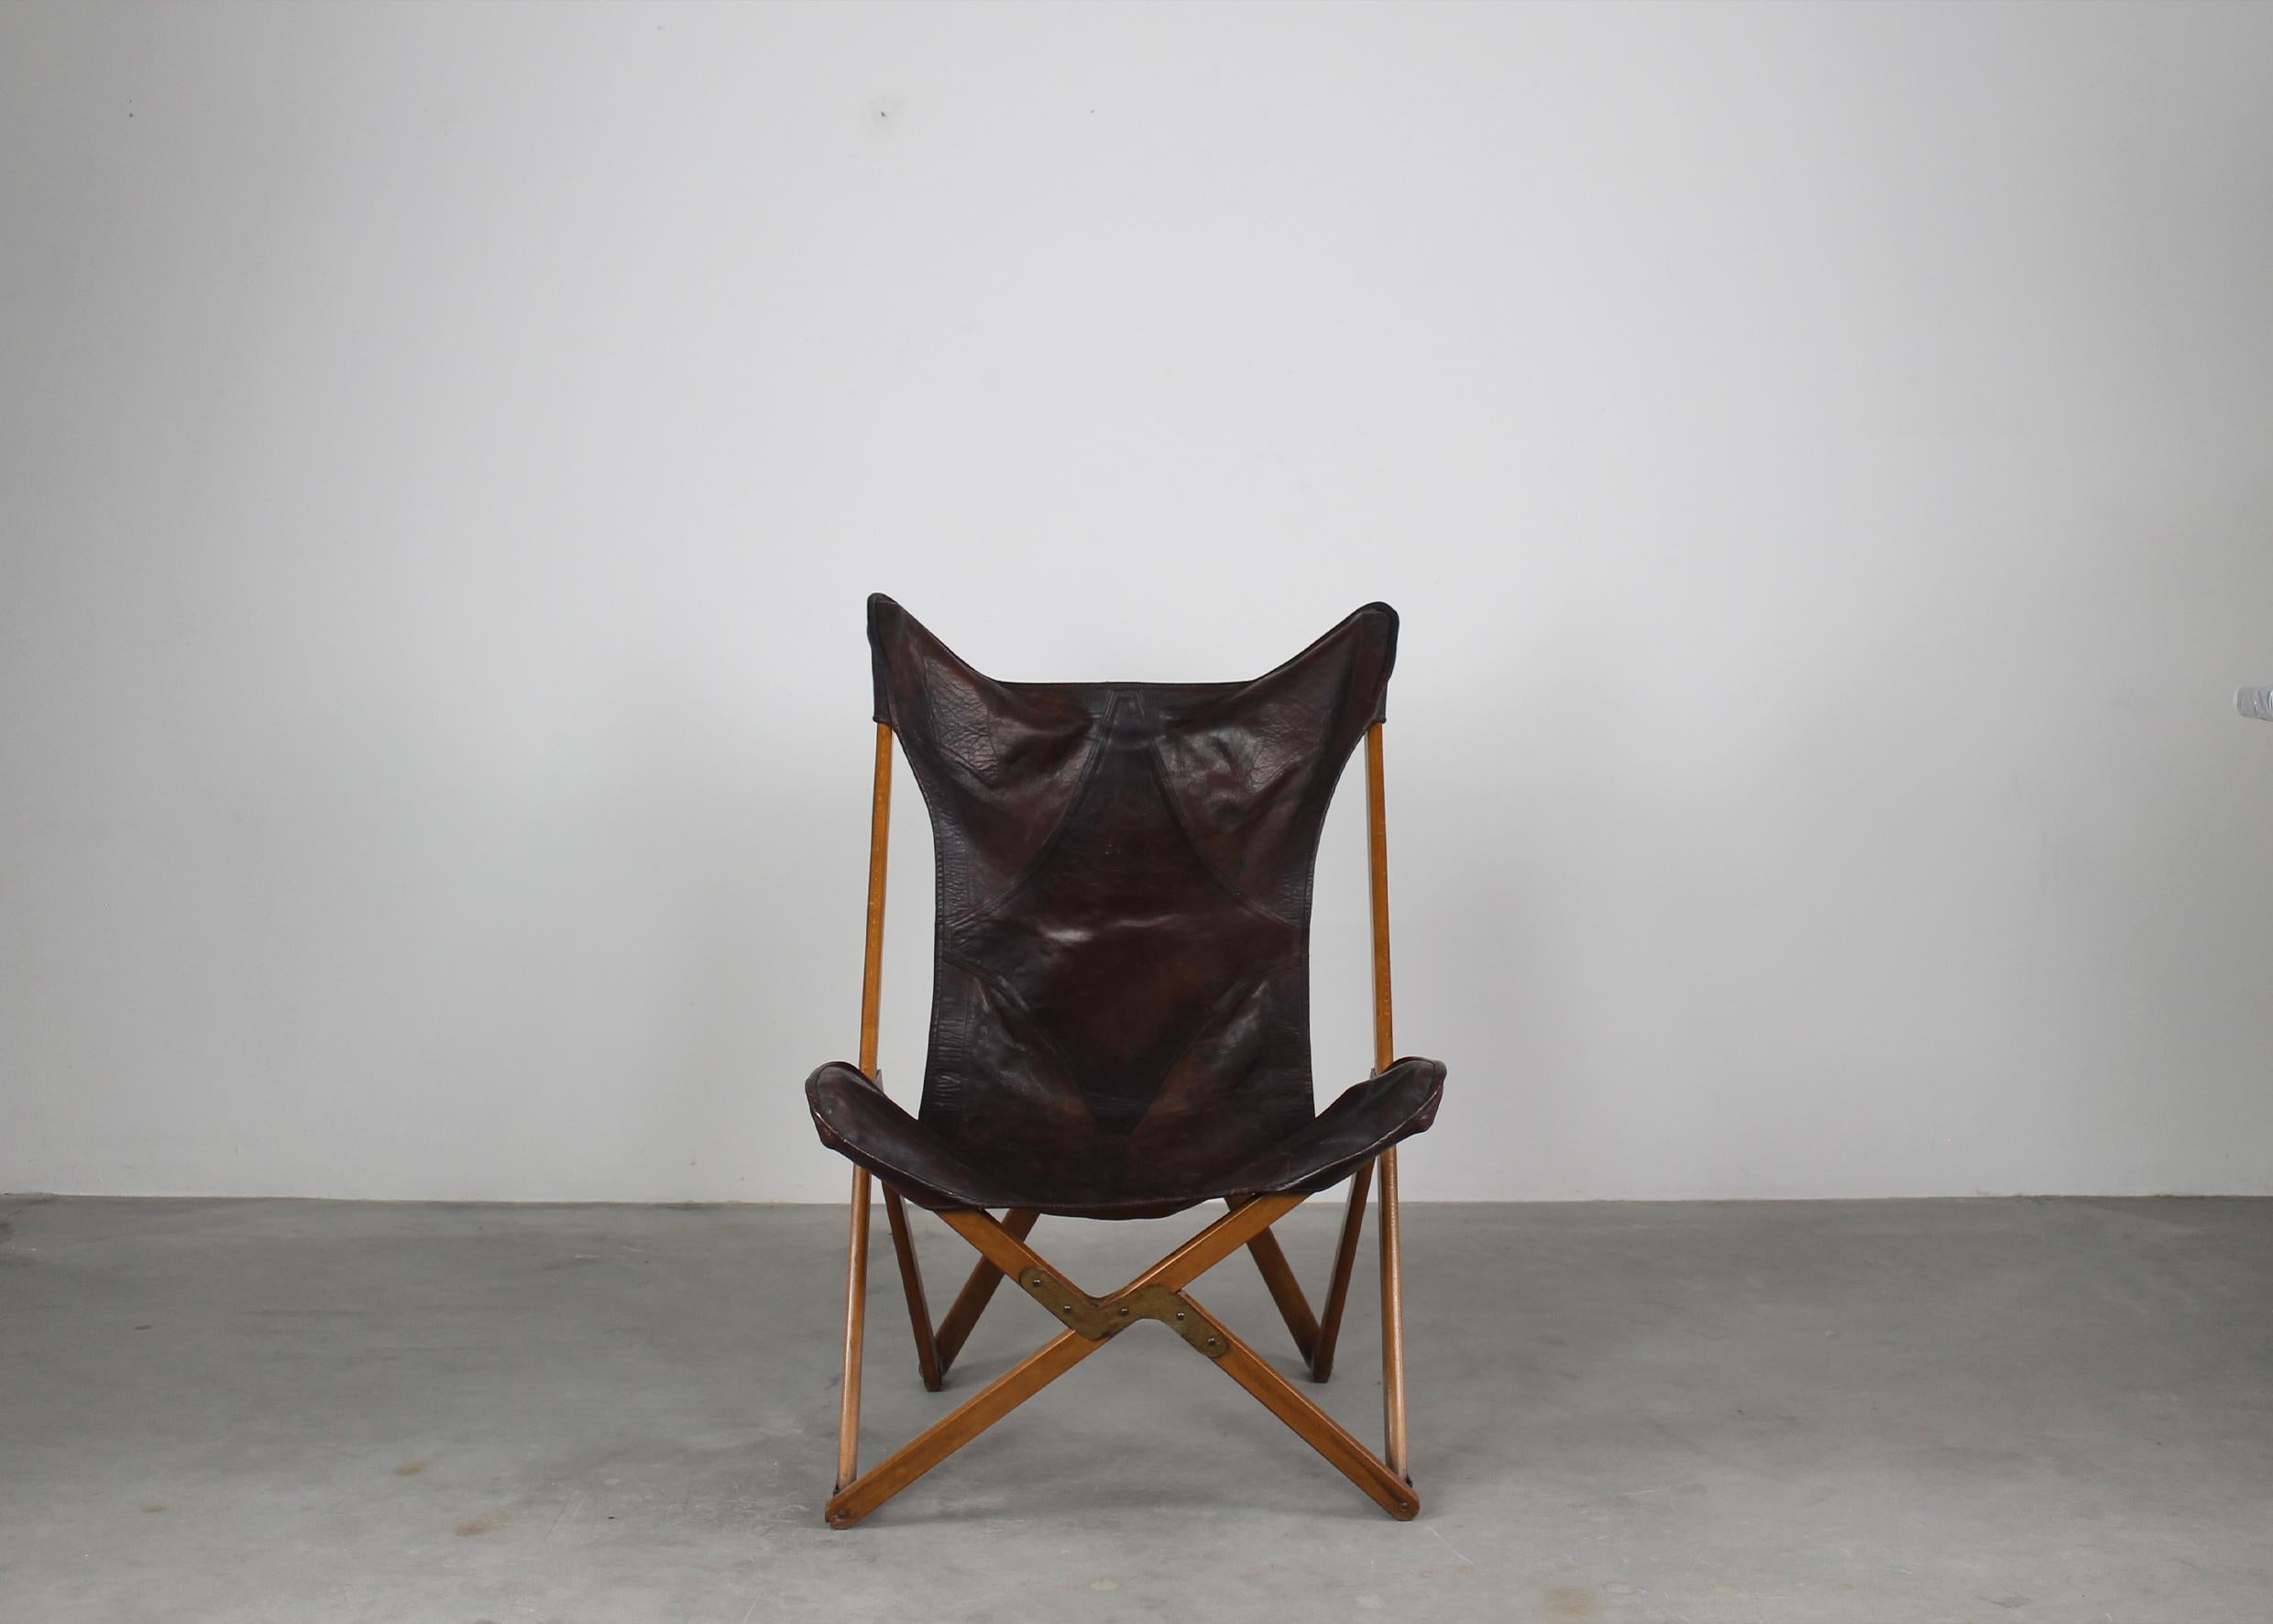 Tripolina folding chair presents a wooden frame with metal fixing and a beautiful removable seat realized in high-quality leather.
This iconic chair was manufactured by the Italian Viganò company during the 1930s. 

The original “Tripolina” chair